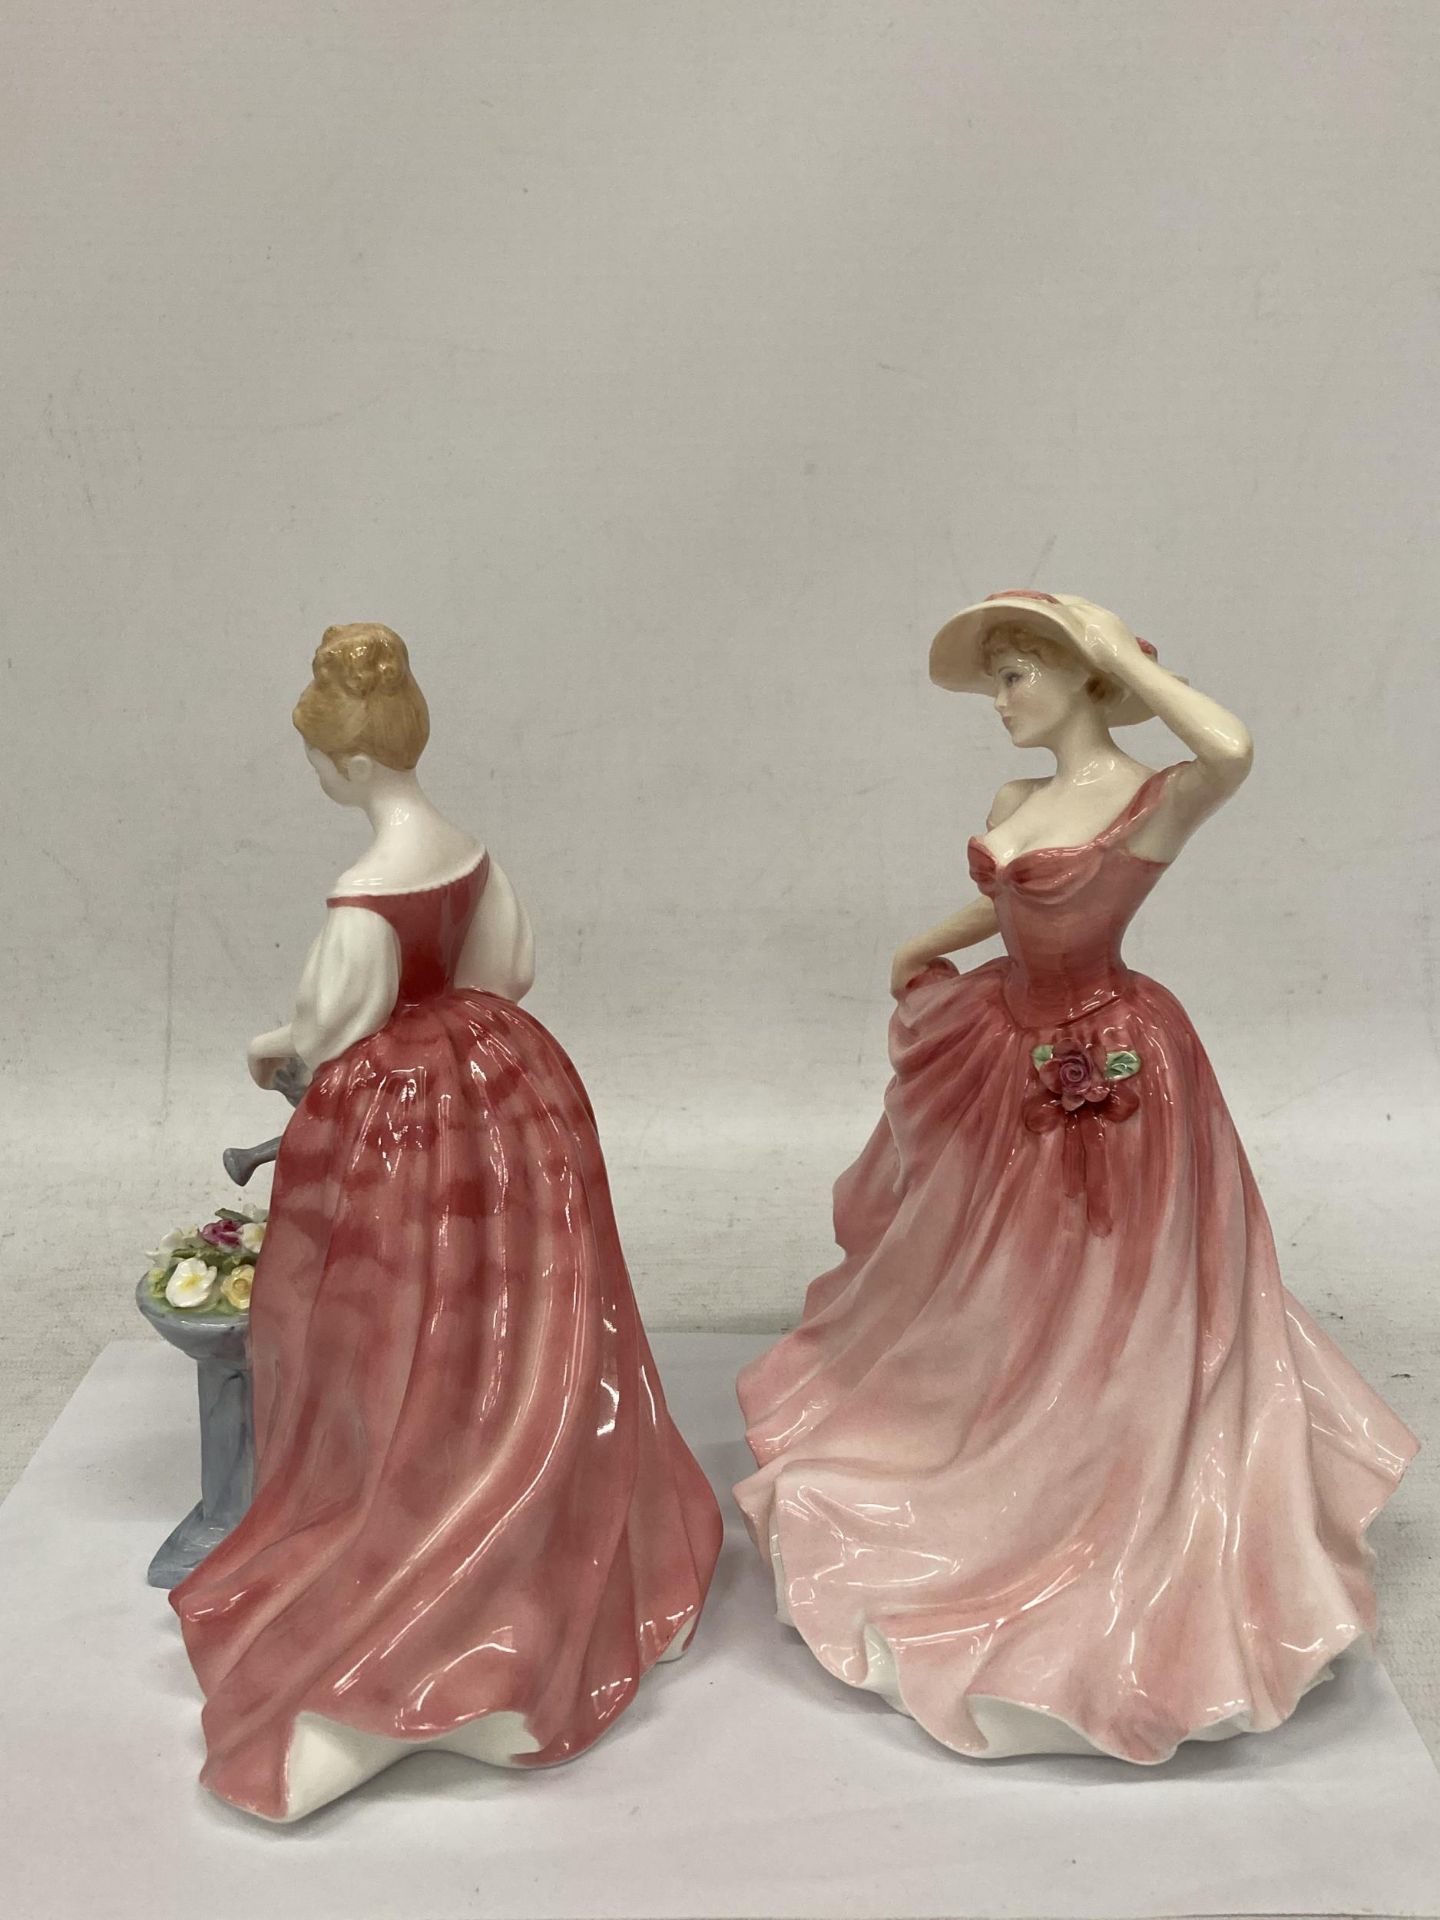 TWO ROYAL DOULTON FIGURINES "ALEXANDRA" HN 3292 AND LADY OF THE YEAR 1997 HN 3992 "ELLEN" - Image 3 of 4